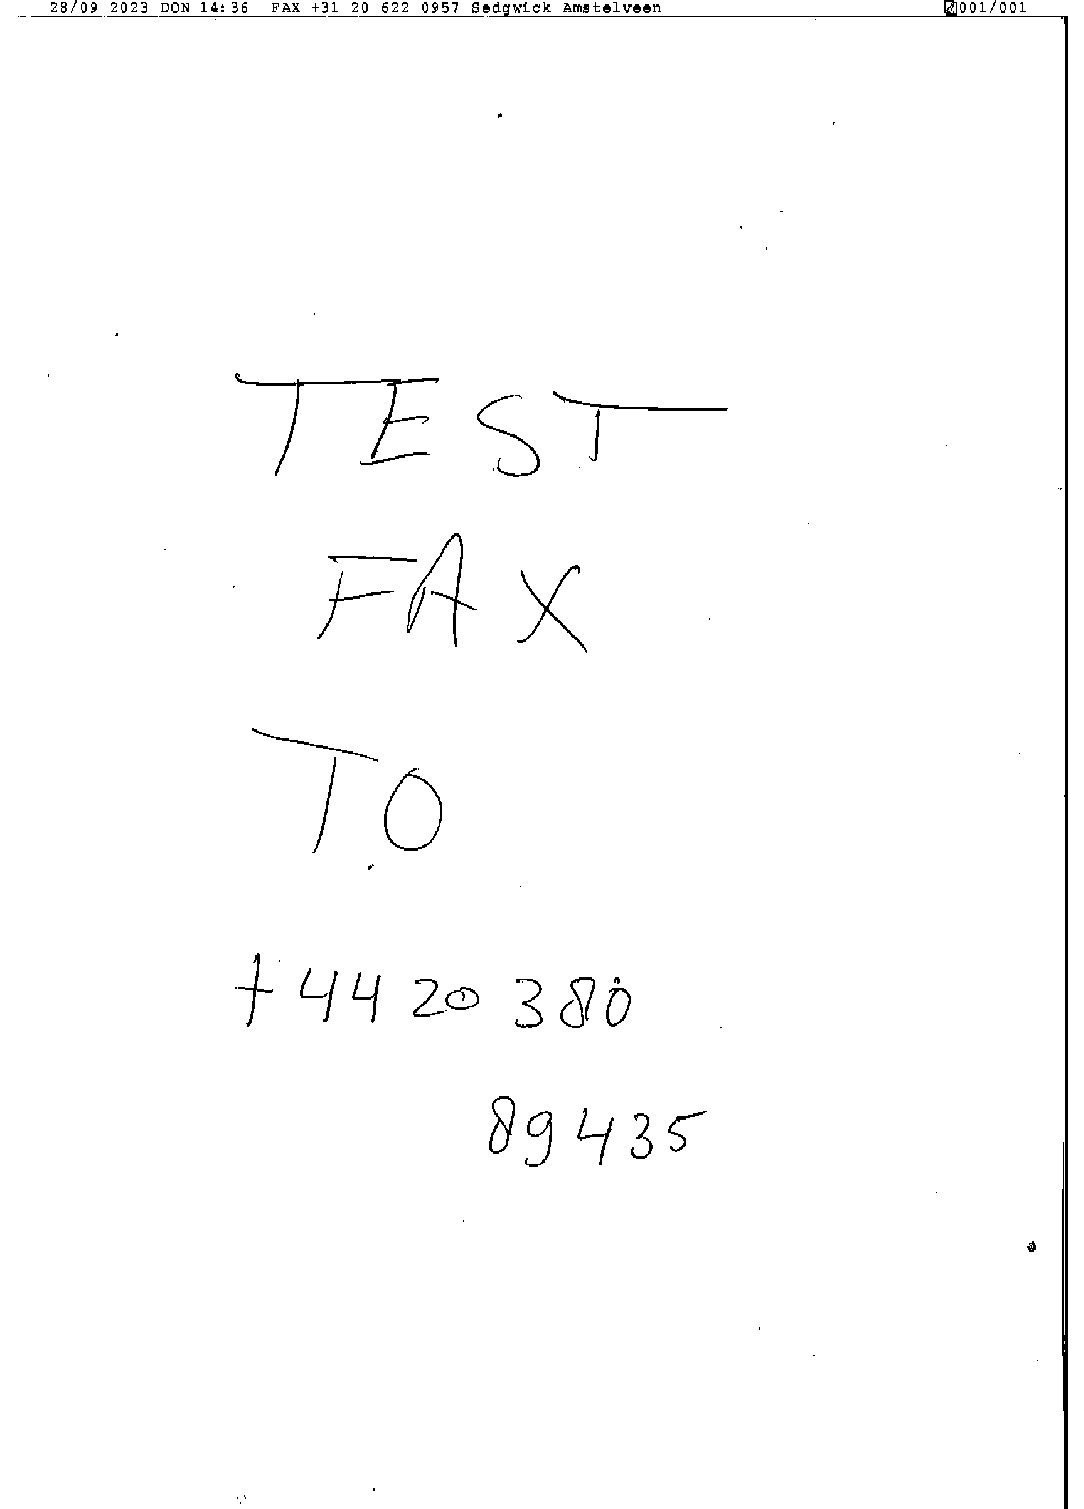 Fax from +312*****957